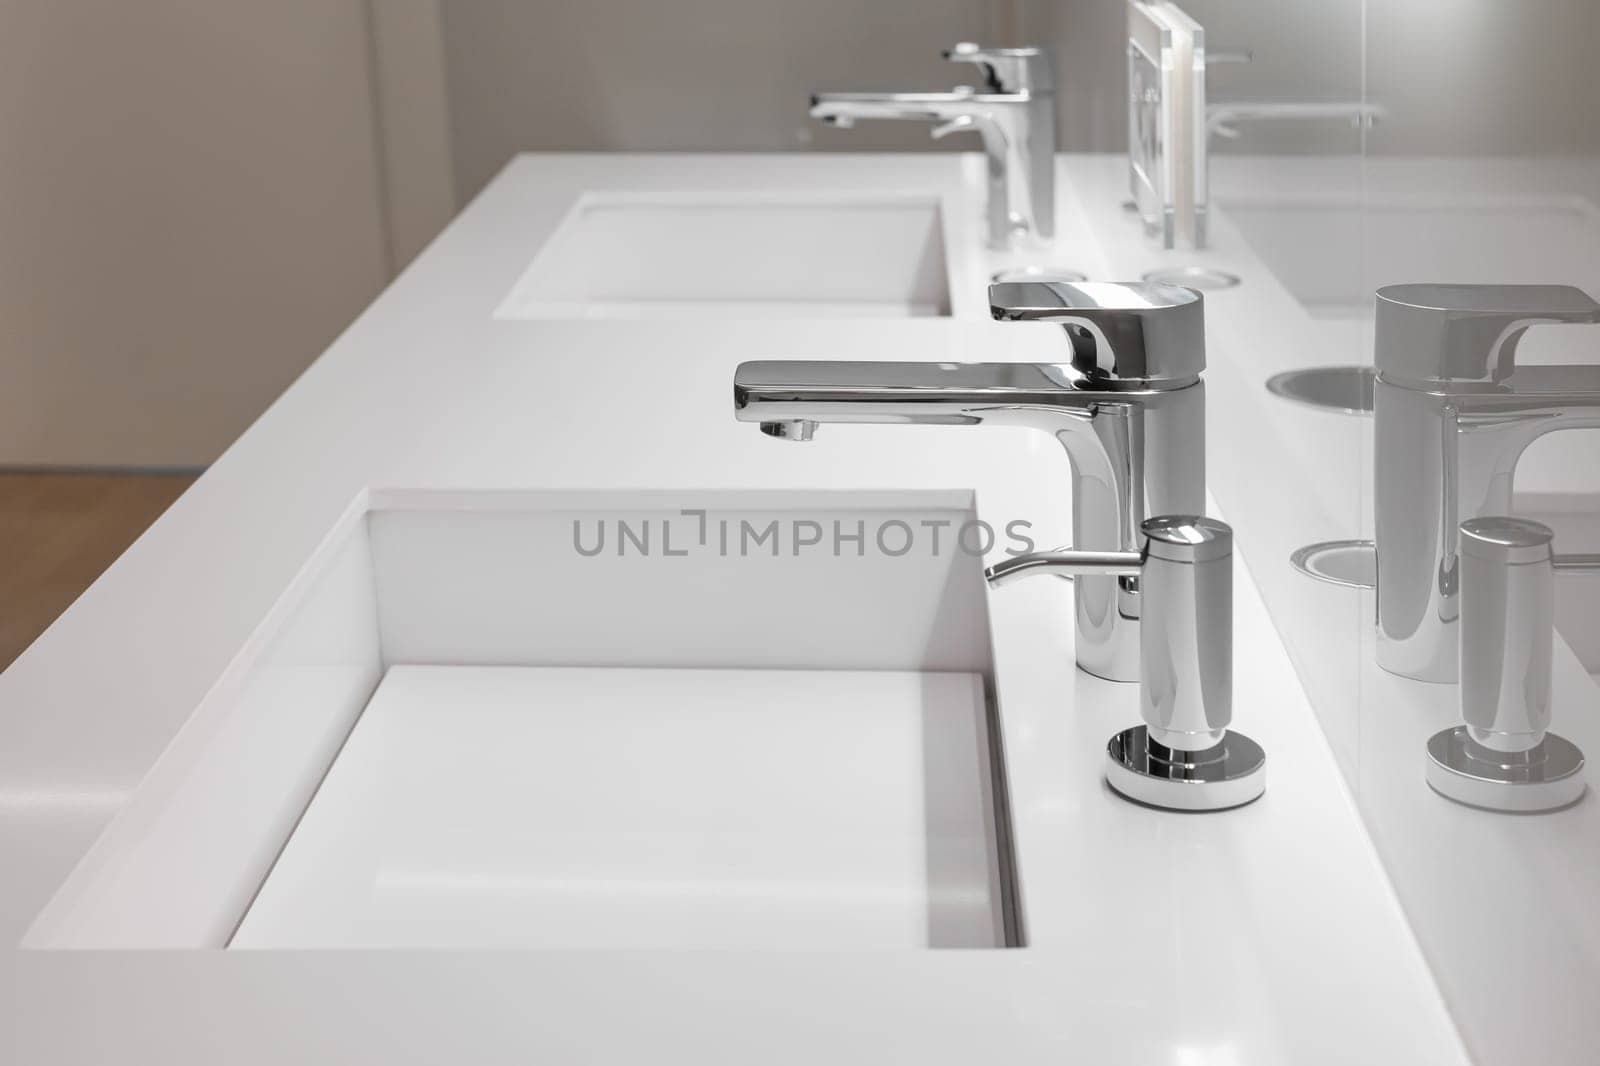 Side view of double white sink with large and small taps for filtering running water for drinking. Concept of modern filtration system and design by apavlin